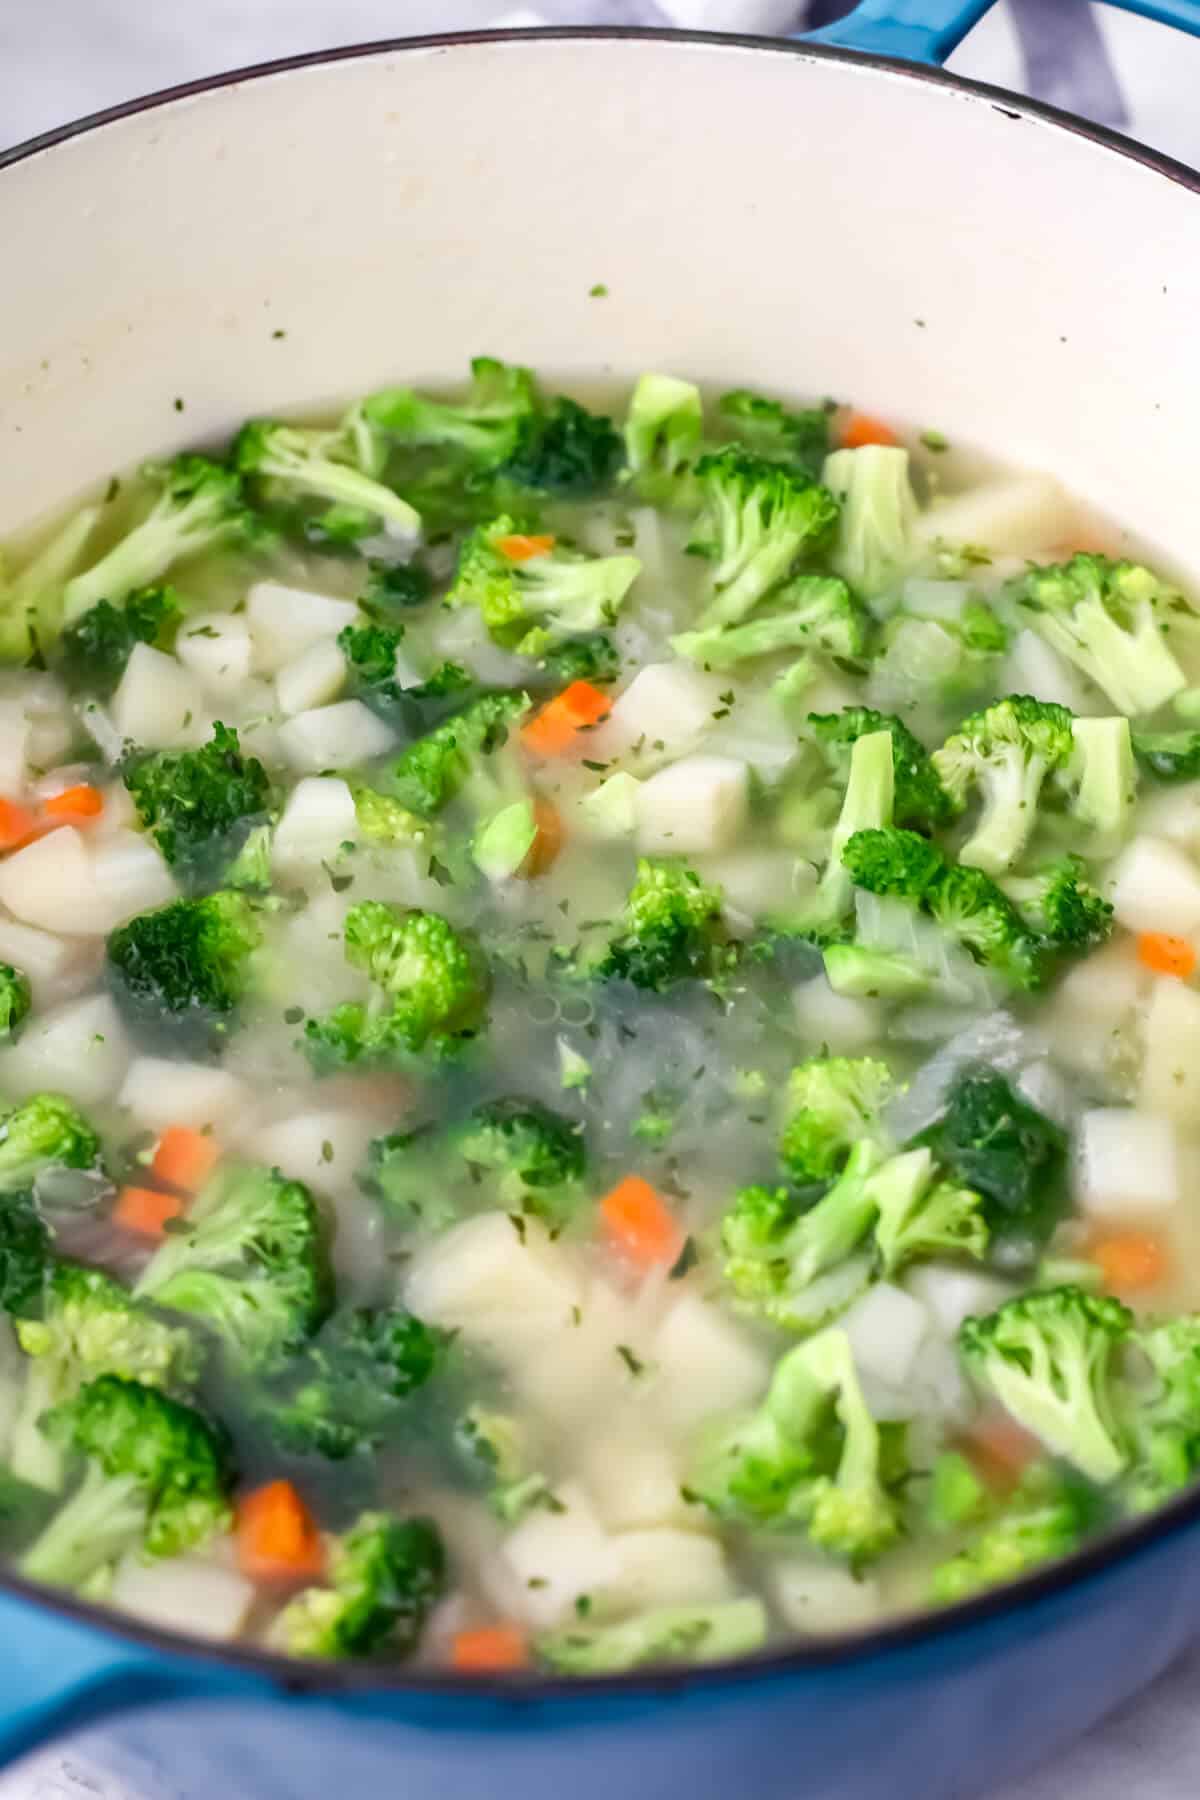 Potatoes, carrots, and broccoli in a soup pot cooking in broth.